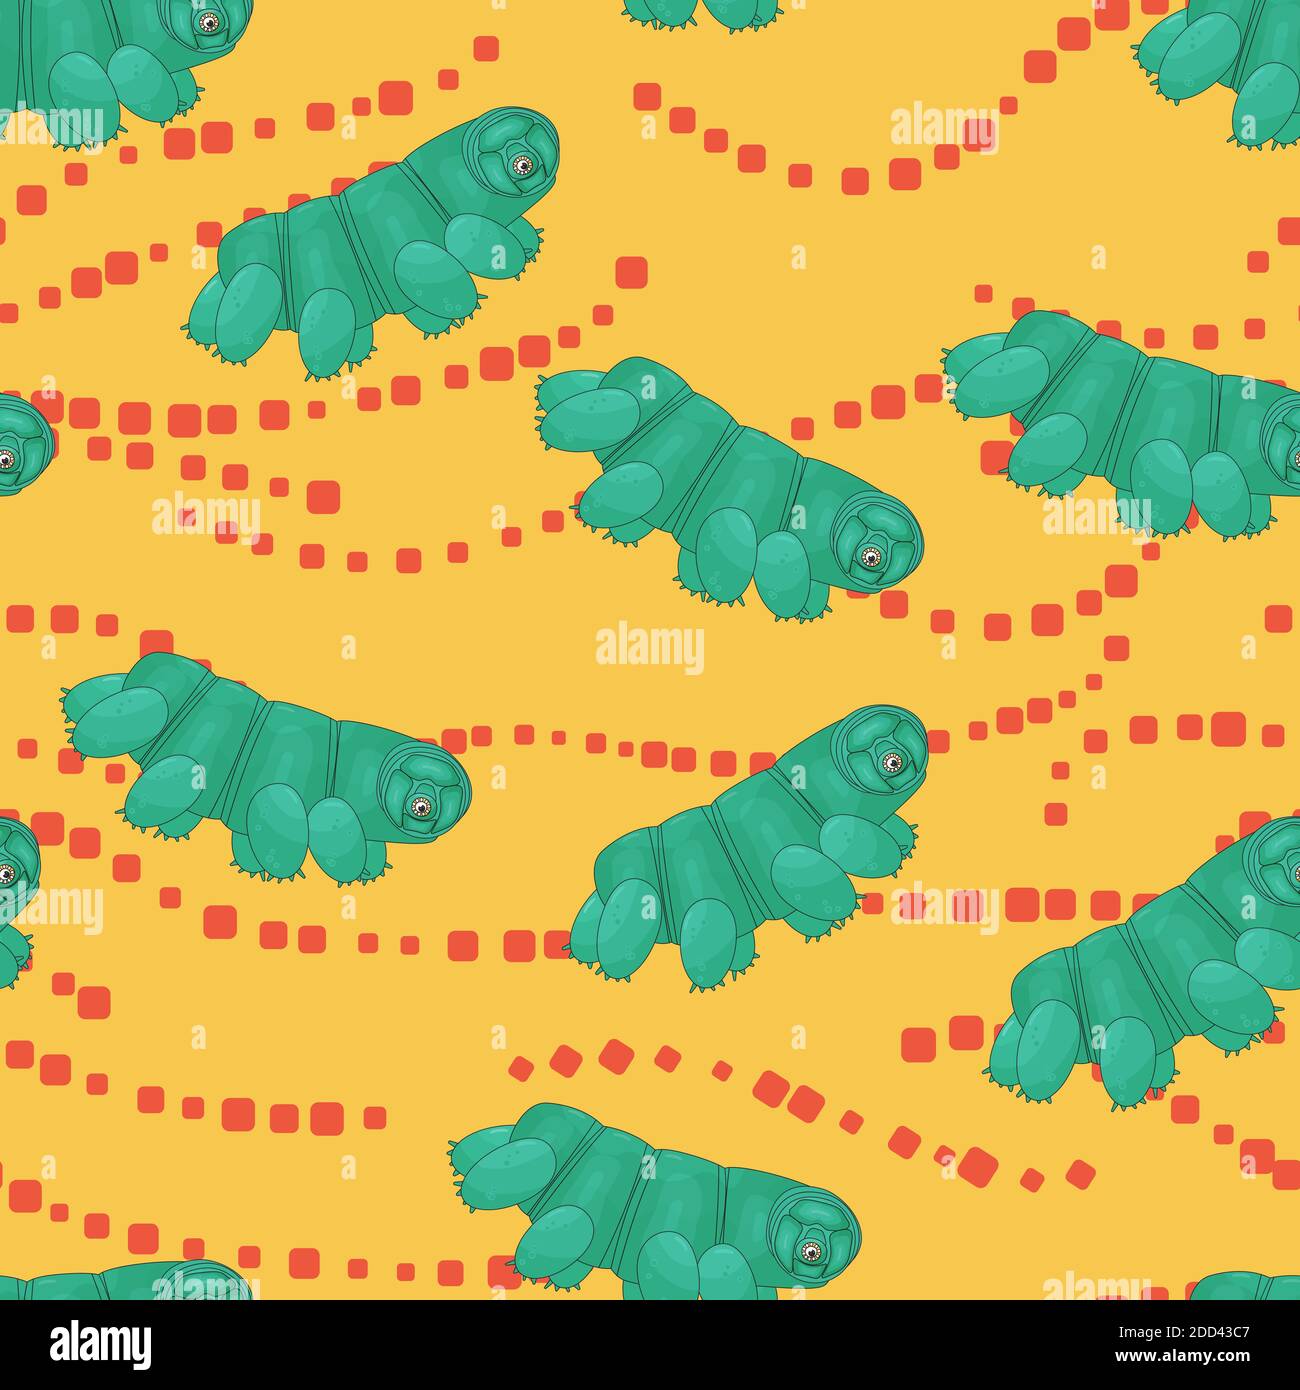 green cute happy Tardigrade, water bears or funny moss piglets vector repeat seamless pattern on yellow background Stock Vector